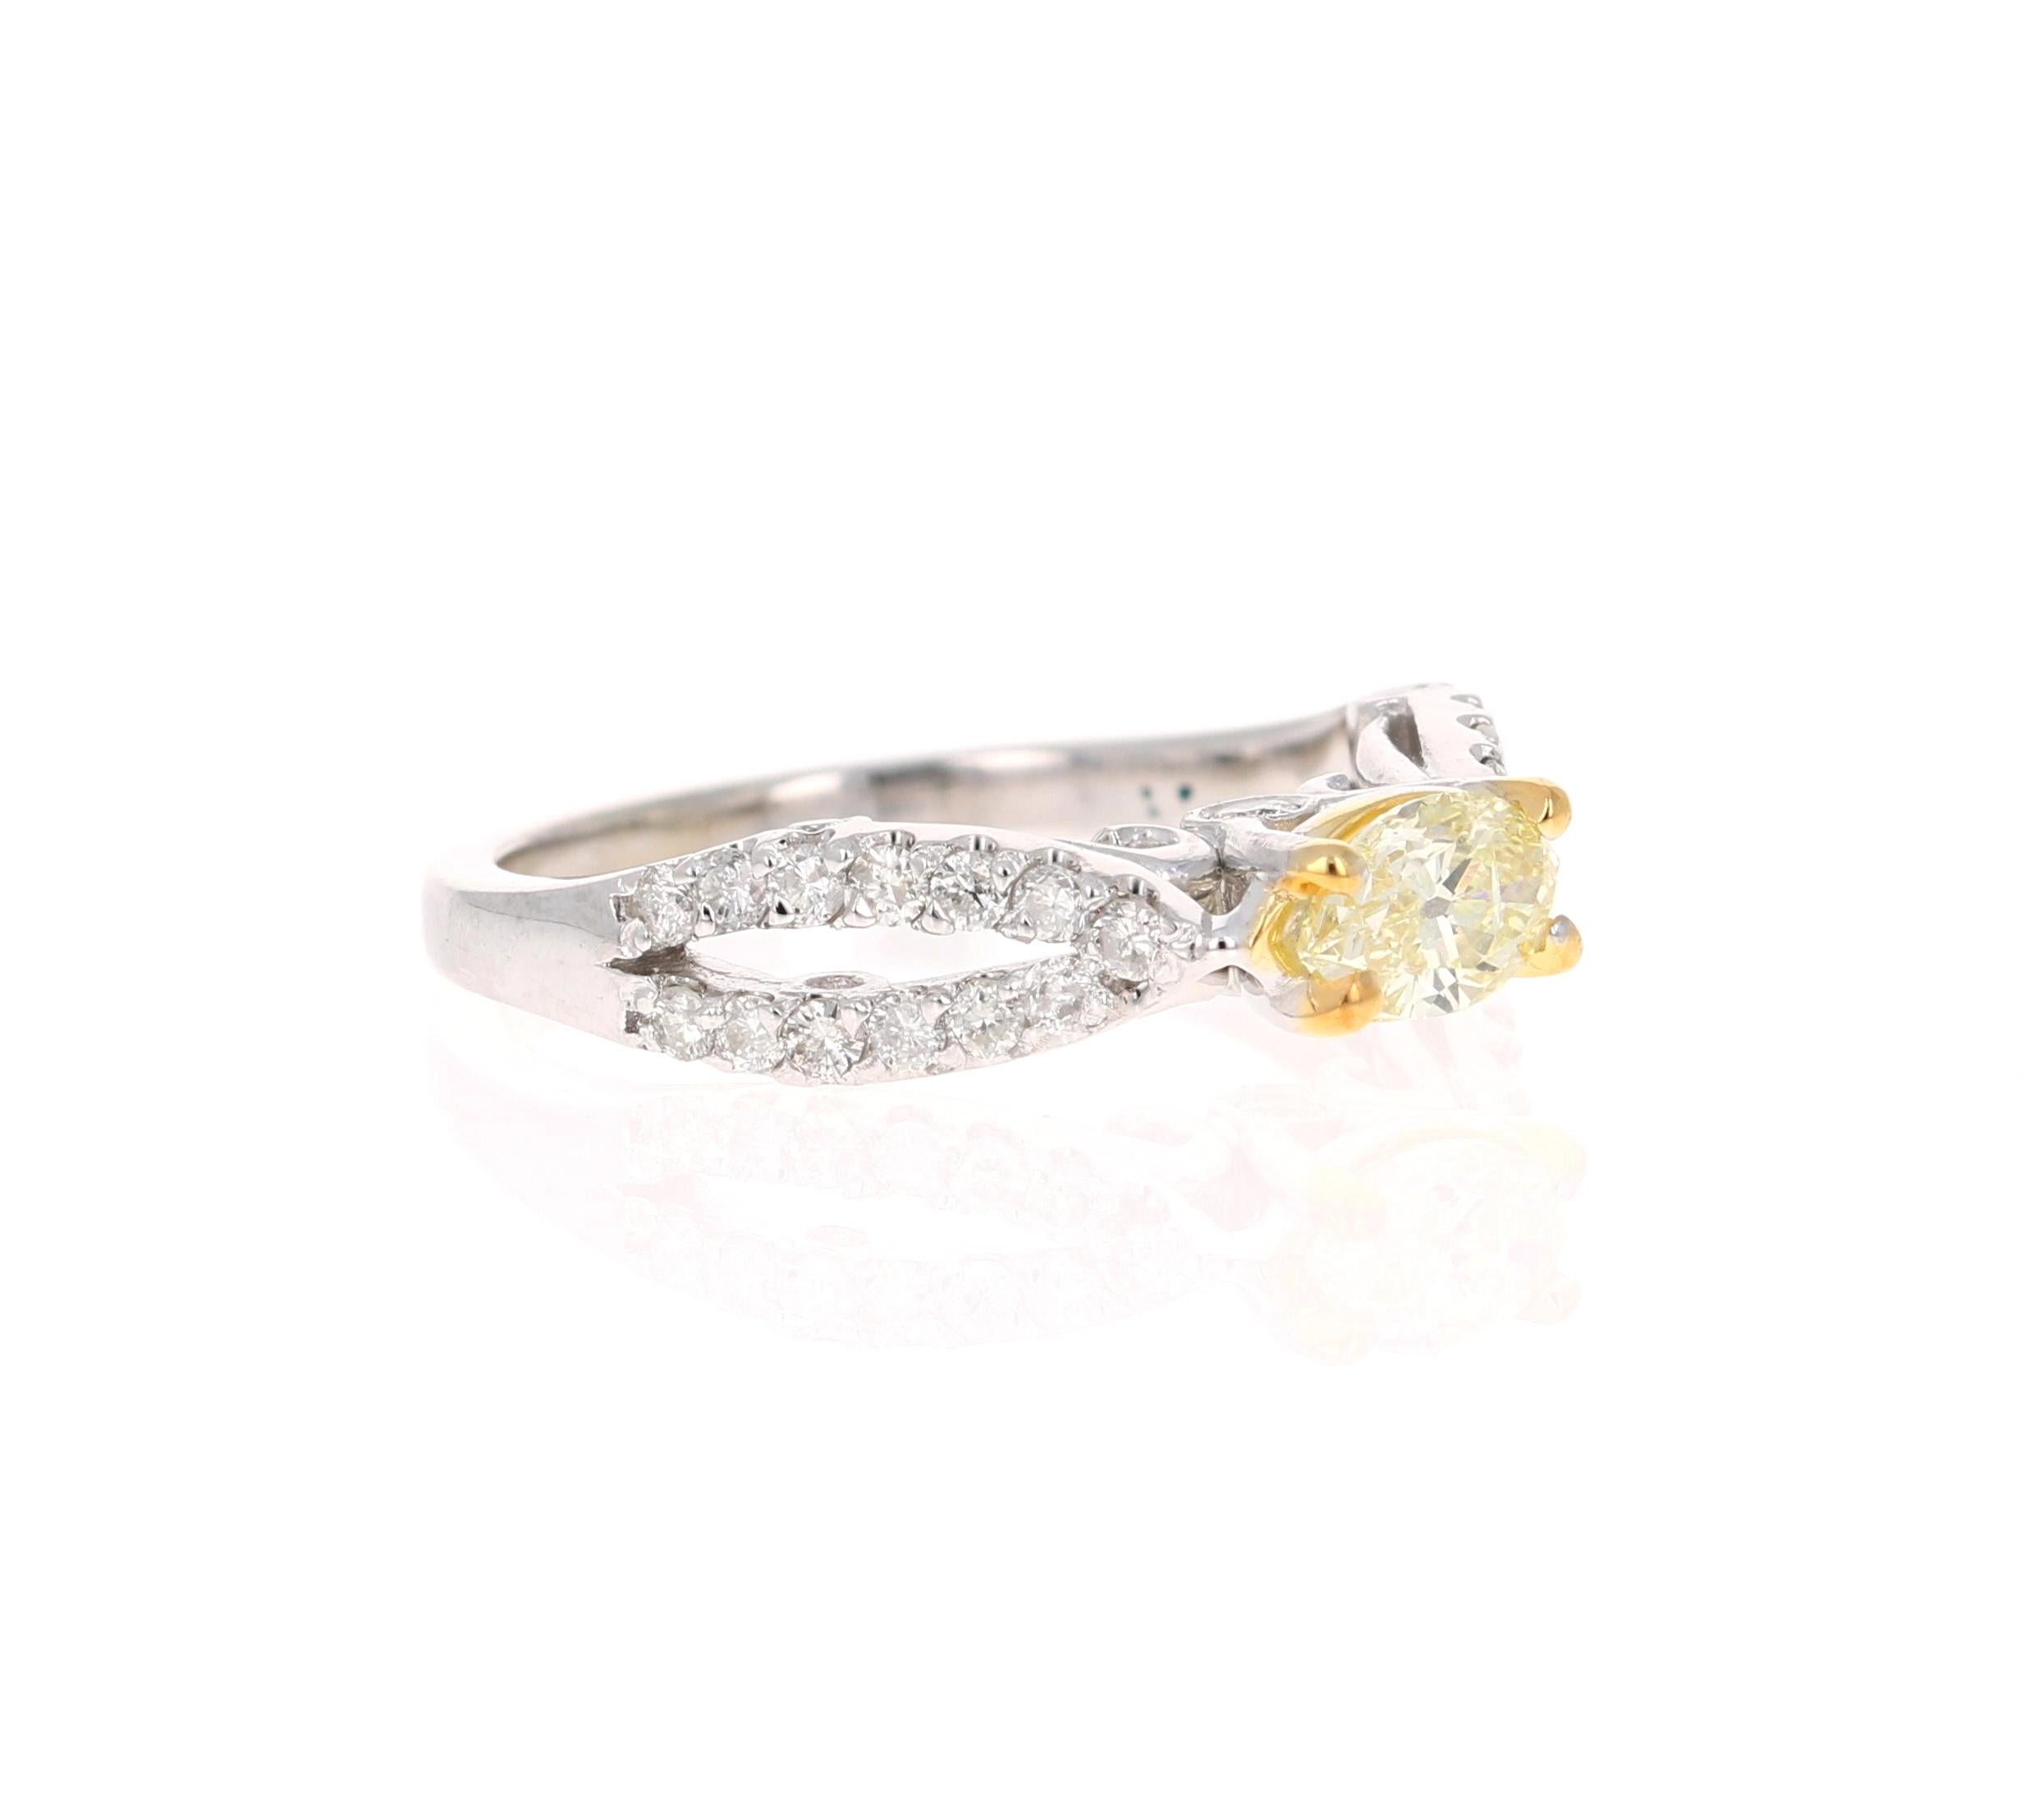 This beauty has a Natural Marquise Cut Yellow Diamond that weighs 0.47 Carats. It is surrounded with a 34 Round Cut Diamonds that weigh 0.40 Carats. The total carat weight of the ring is 0.87 Carats. 

The ring is curated in 14 Karat White Gold and